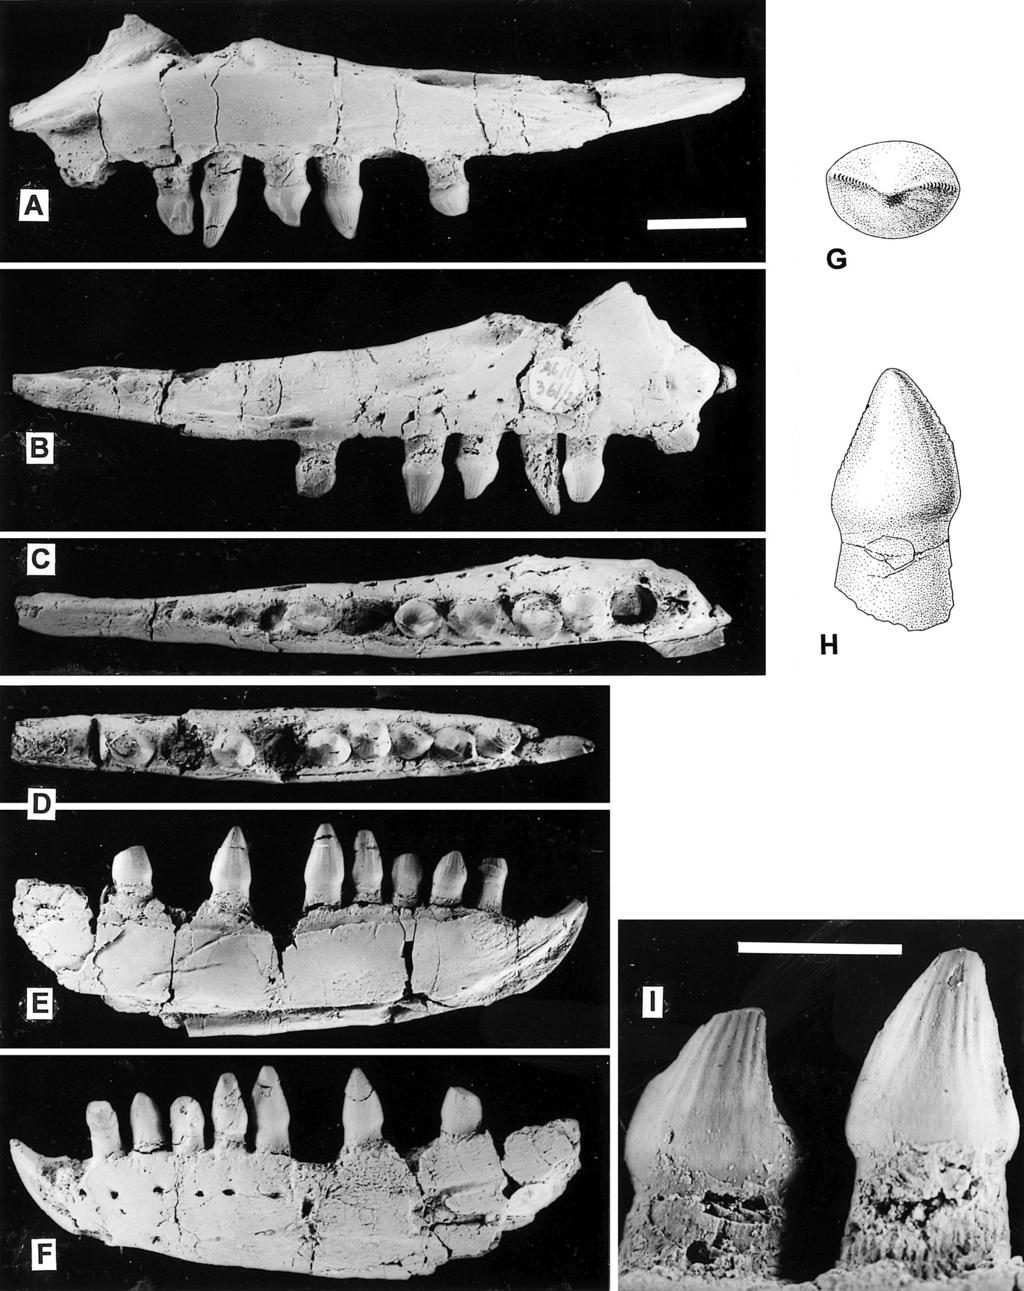 562 JOURNAL OF VERTEBRATE PALEONTOLOGY, VOL. 23, NO. 3, 2003 FIGURE 5. Jaw bones of Silesaurus opolensis from the early Late Triassic upper horizon in Krasiejów near Opole, Poland.